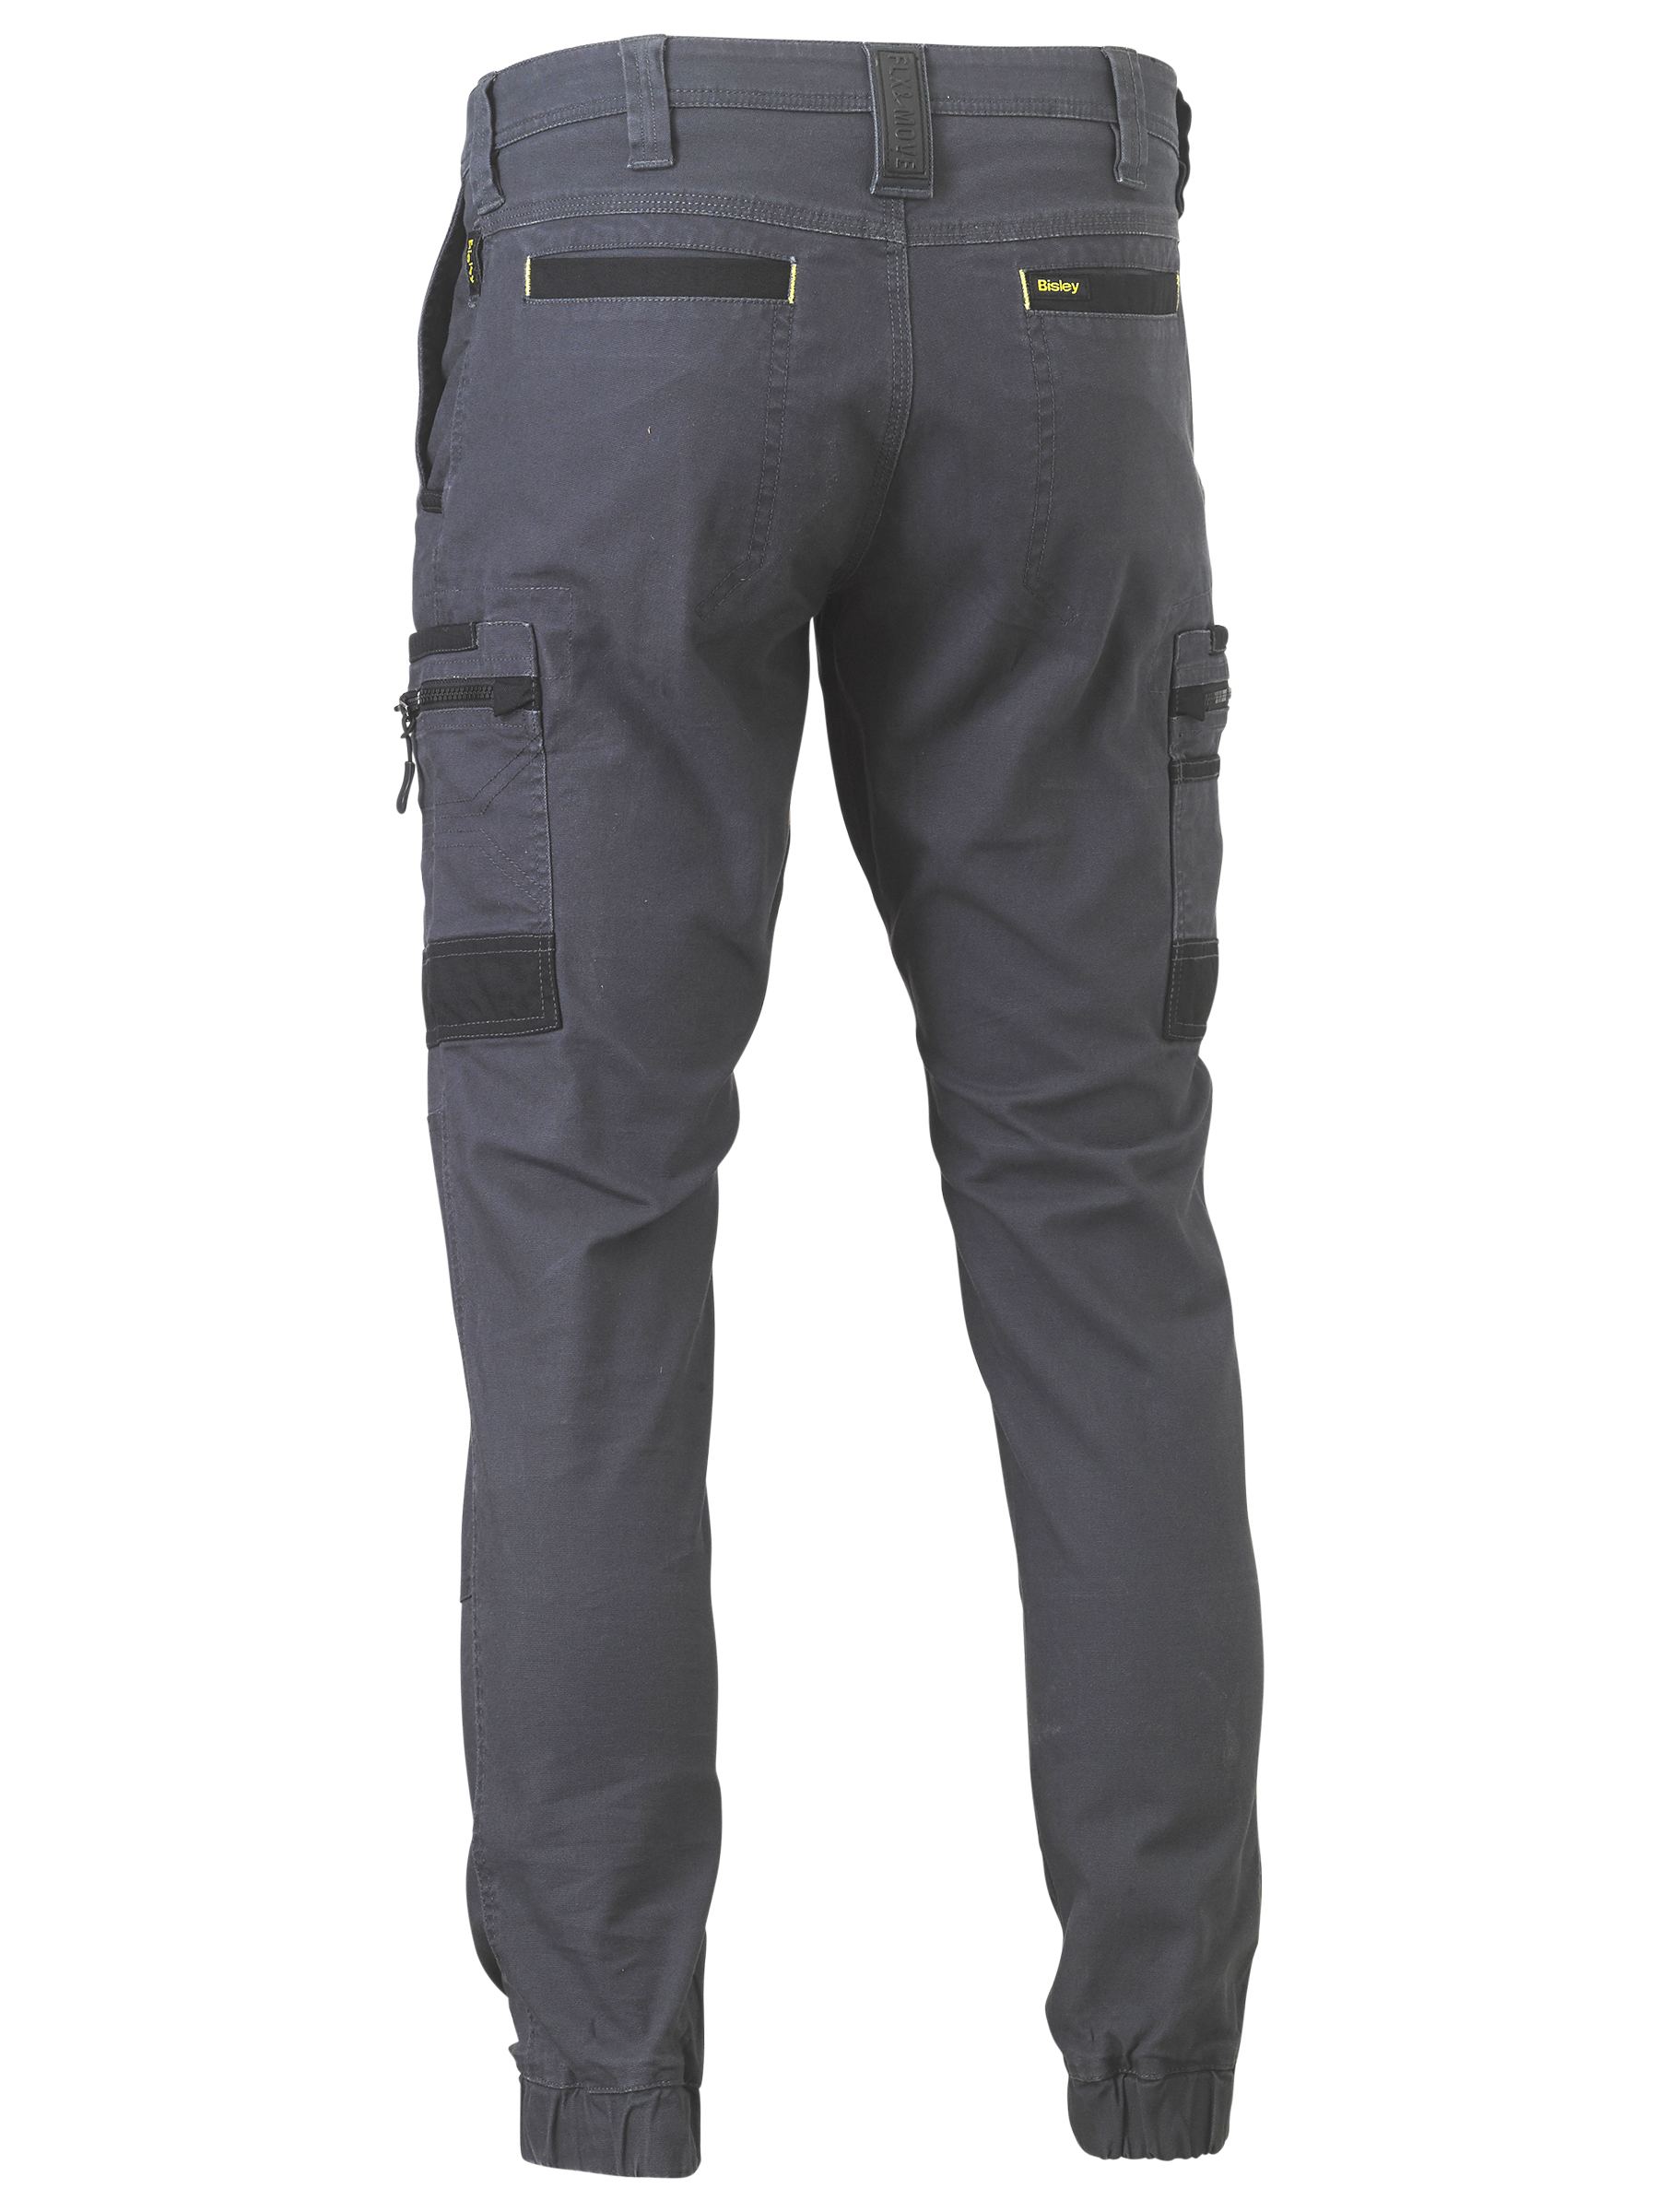 Flx and Move™ modern fit stretch cargo cuffed pants - BPC6334 - Bisley ...